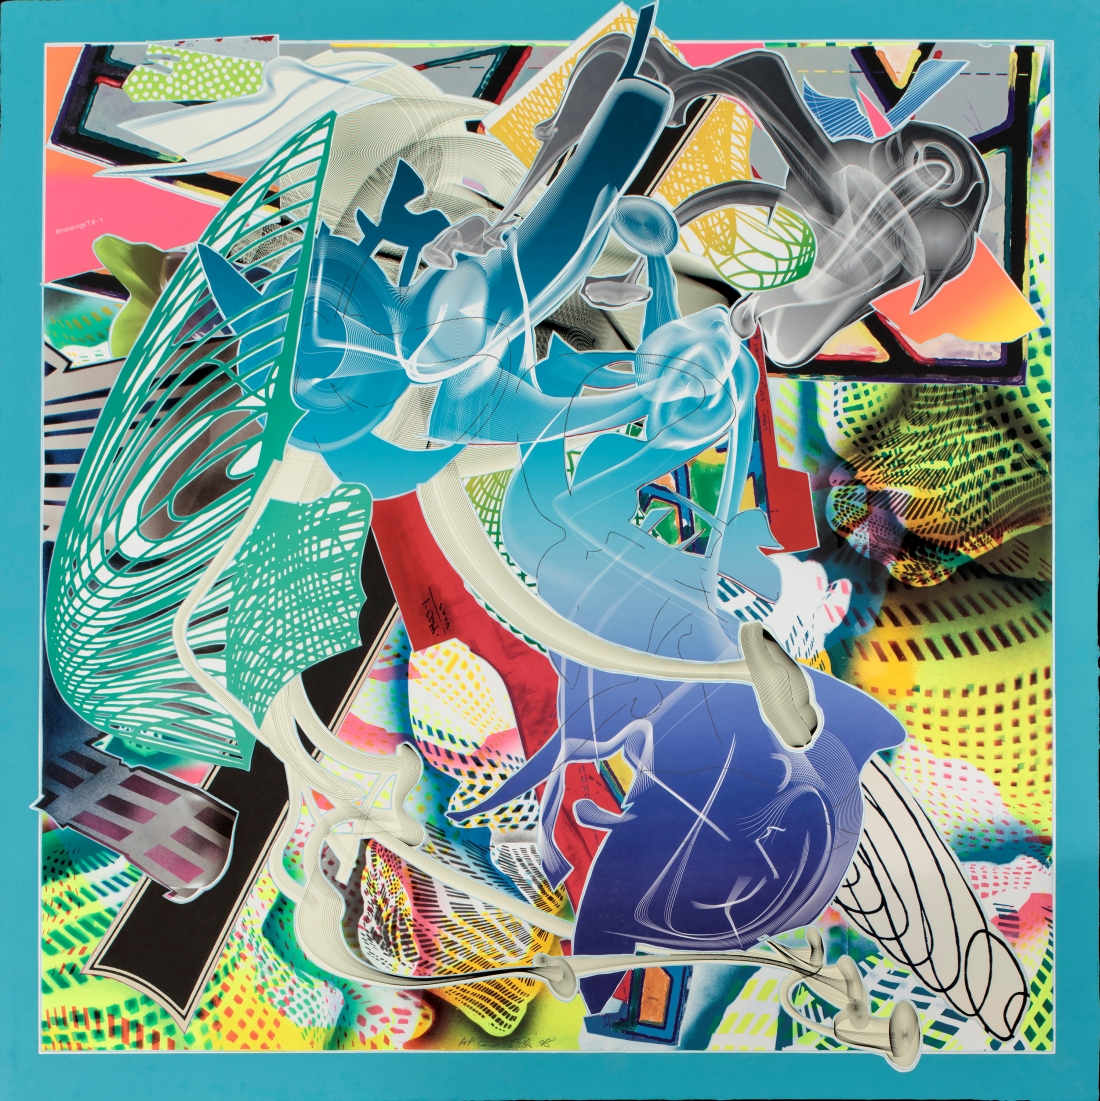 Cantahar (1998) by Frank Stella. Lithograph, screenprint, etching, aquatint and relief on paper